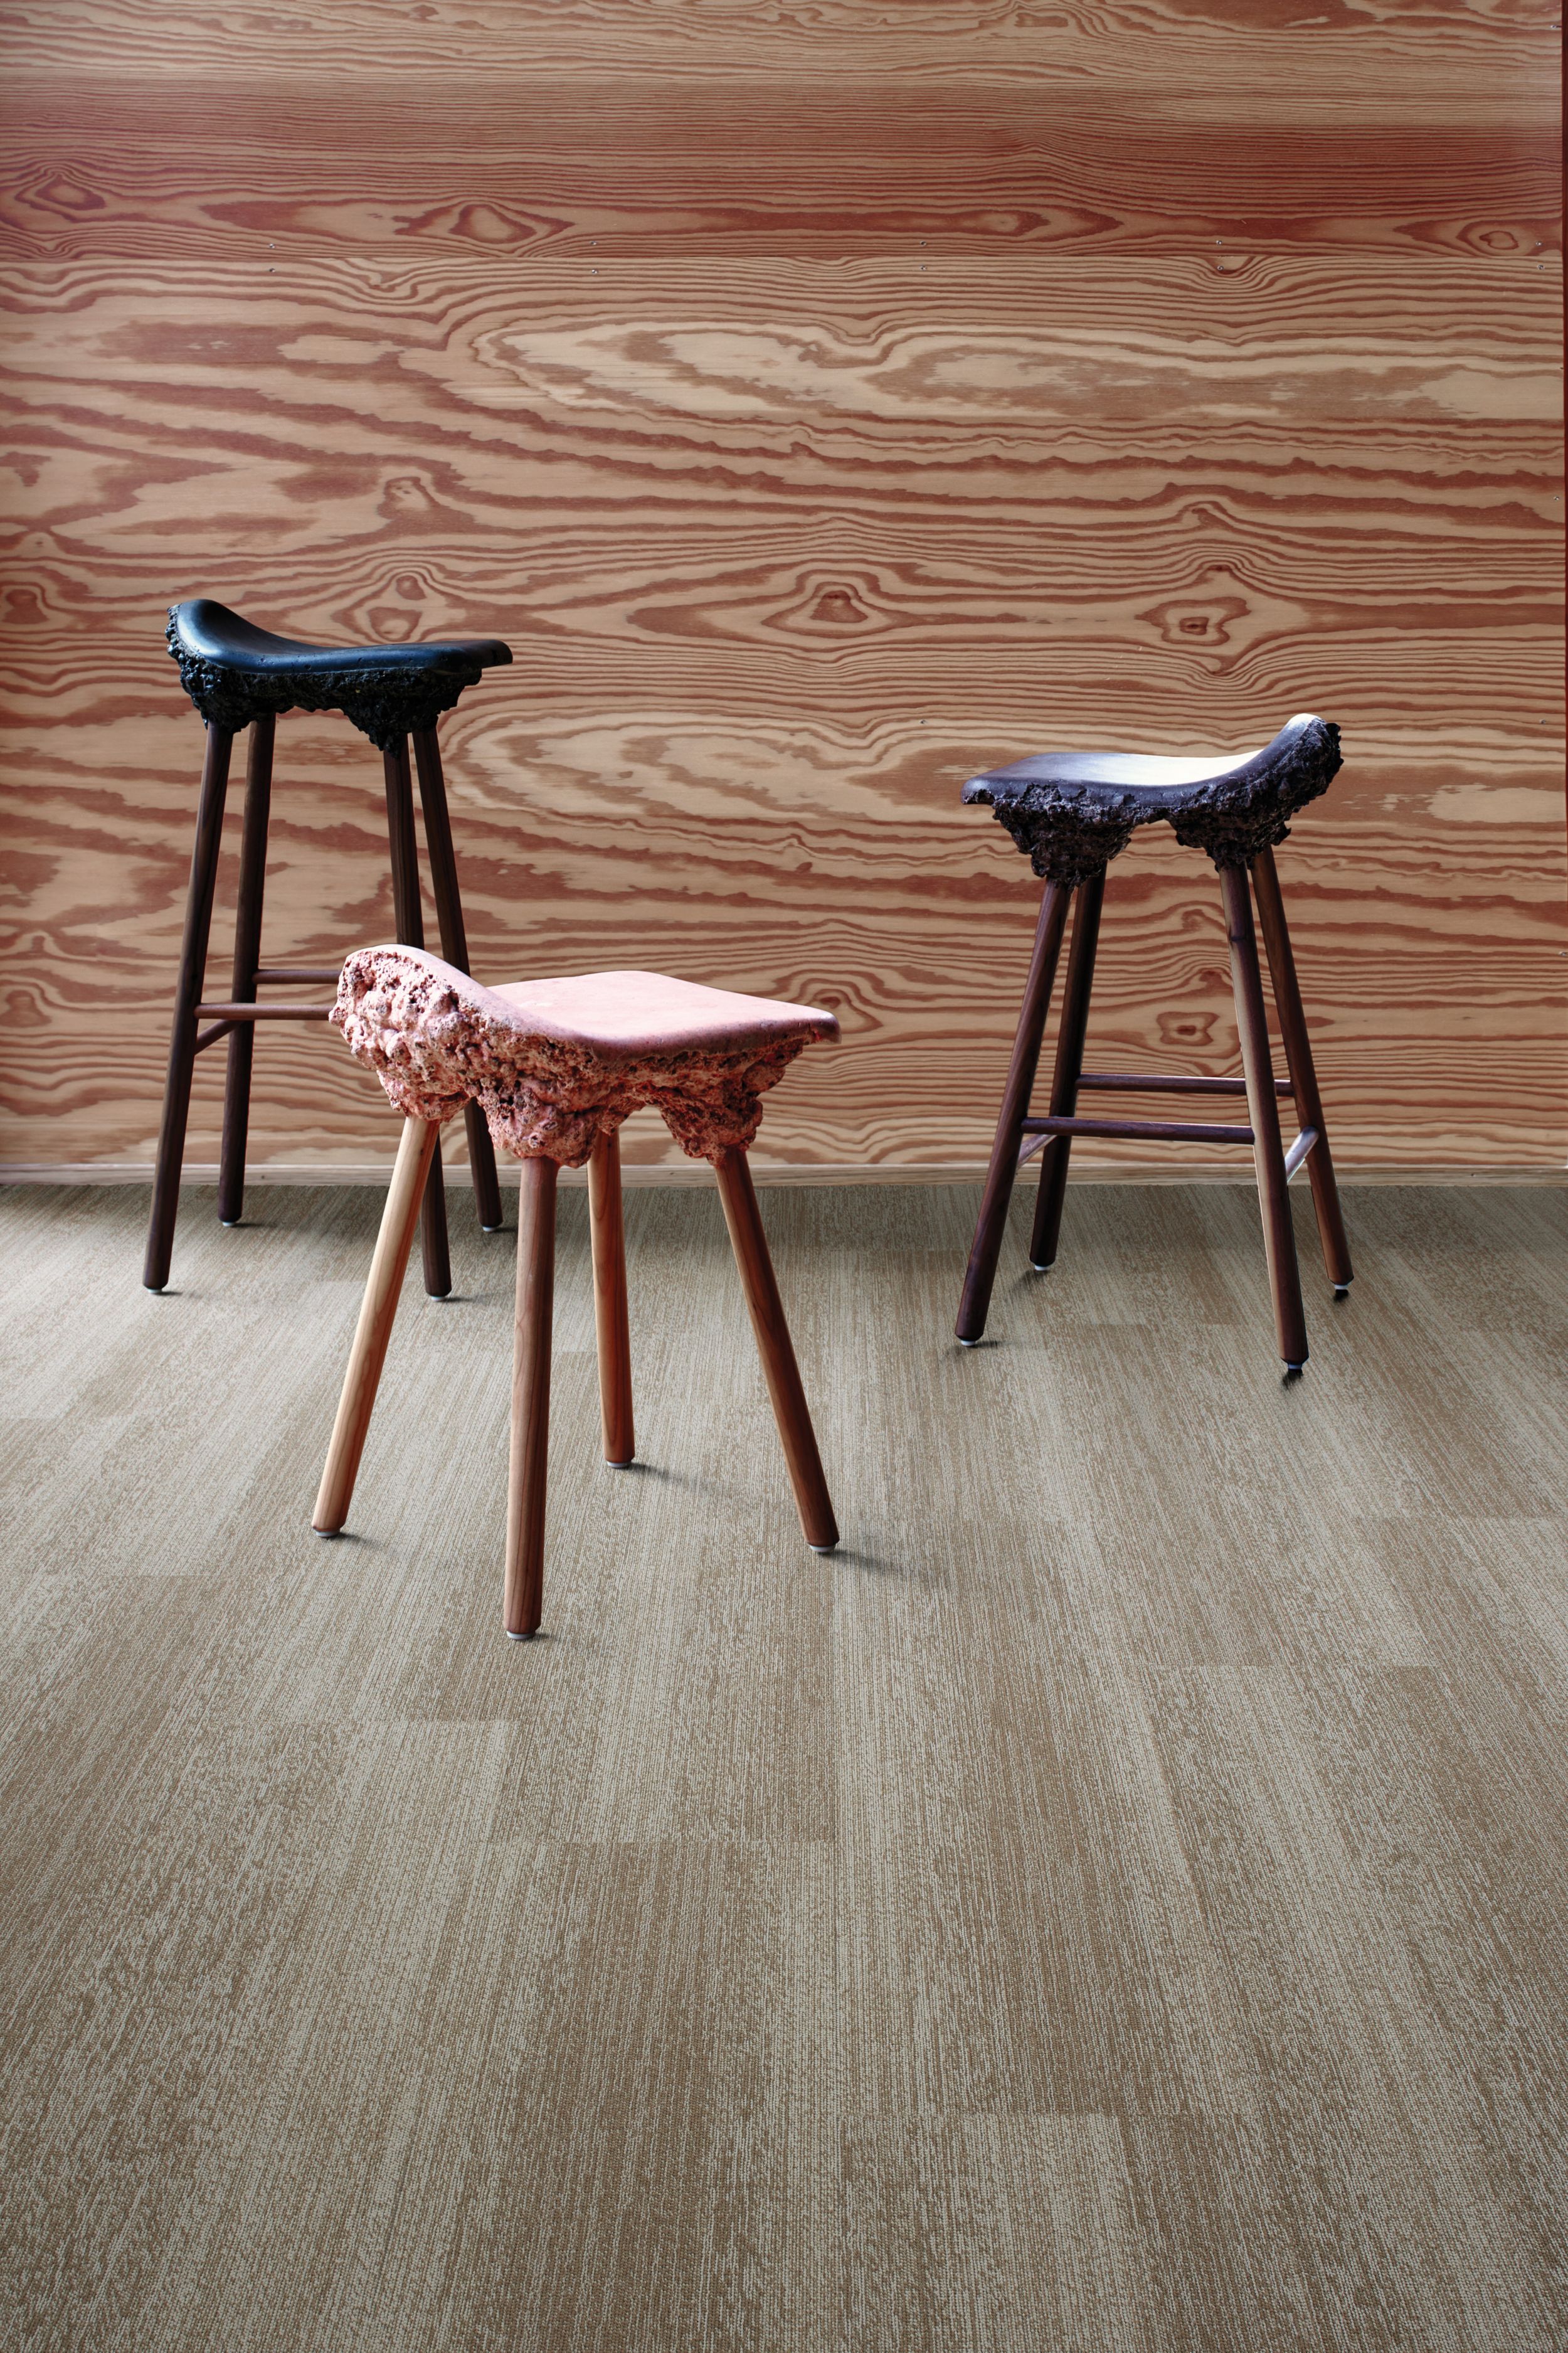 Interface Touch of Timber plank carpet tile in room with plywood wall and three unusual stools Bildnummer 6